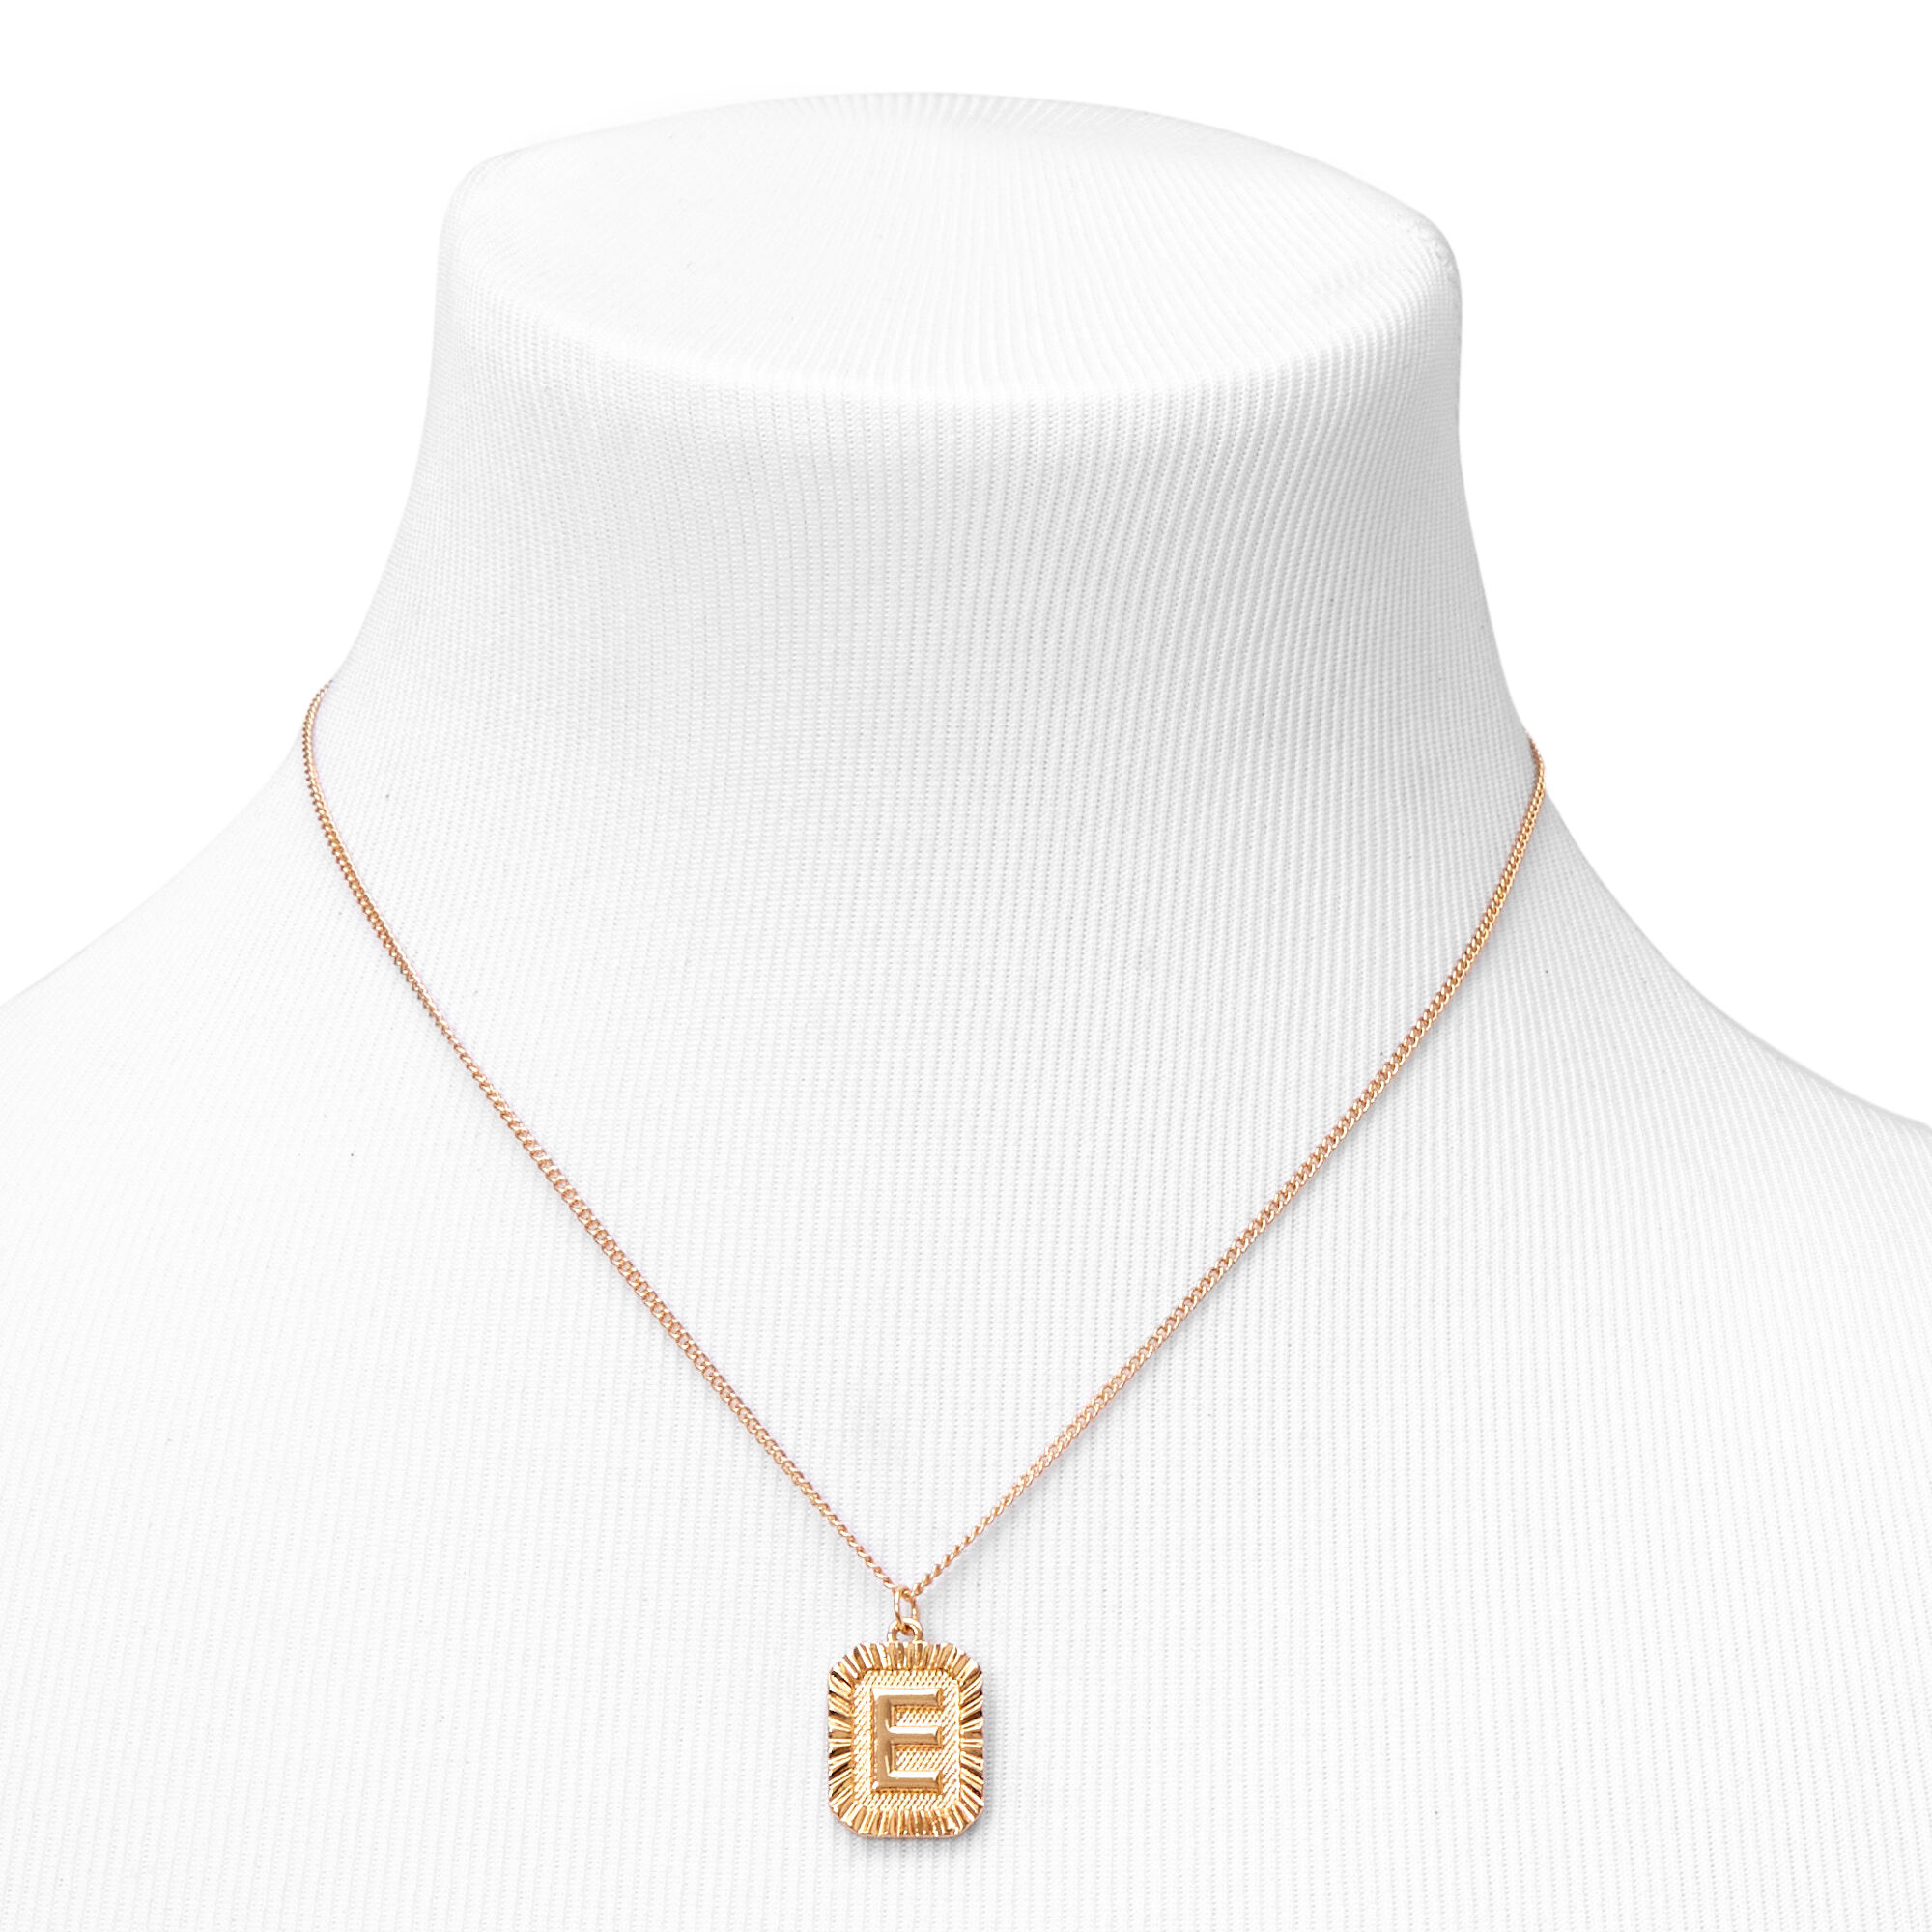 Gold Tiny Initial Necklace | Initial Disc | Blooming Lotus Jewelry